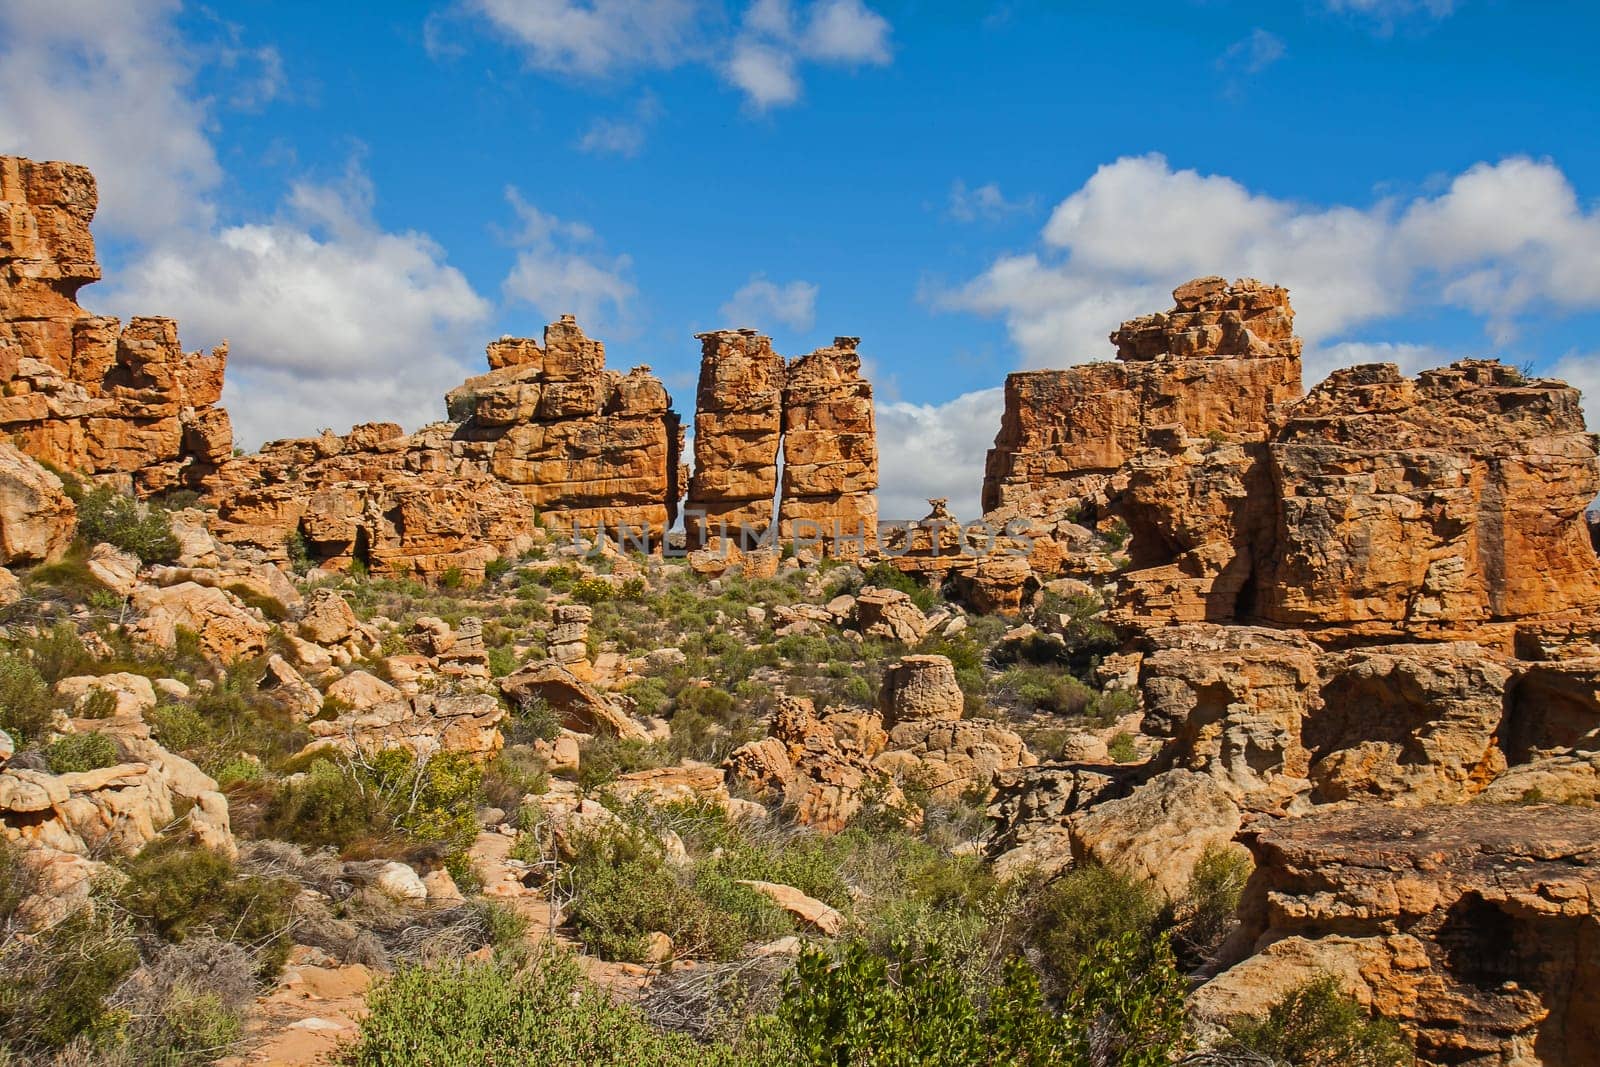 Cederberg Rock Formations 12830 by kobus_peche